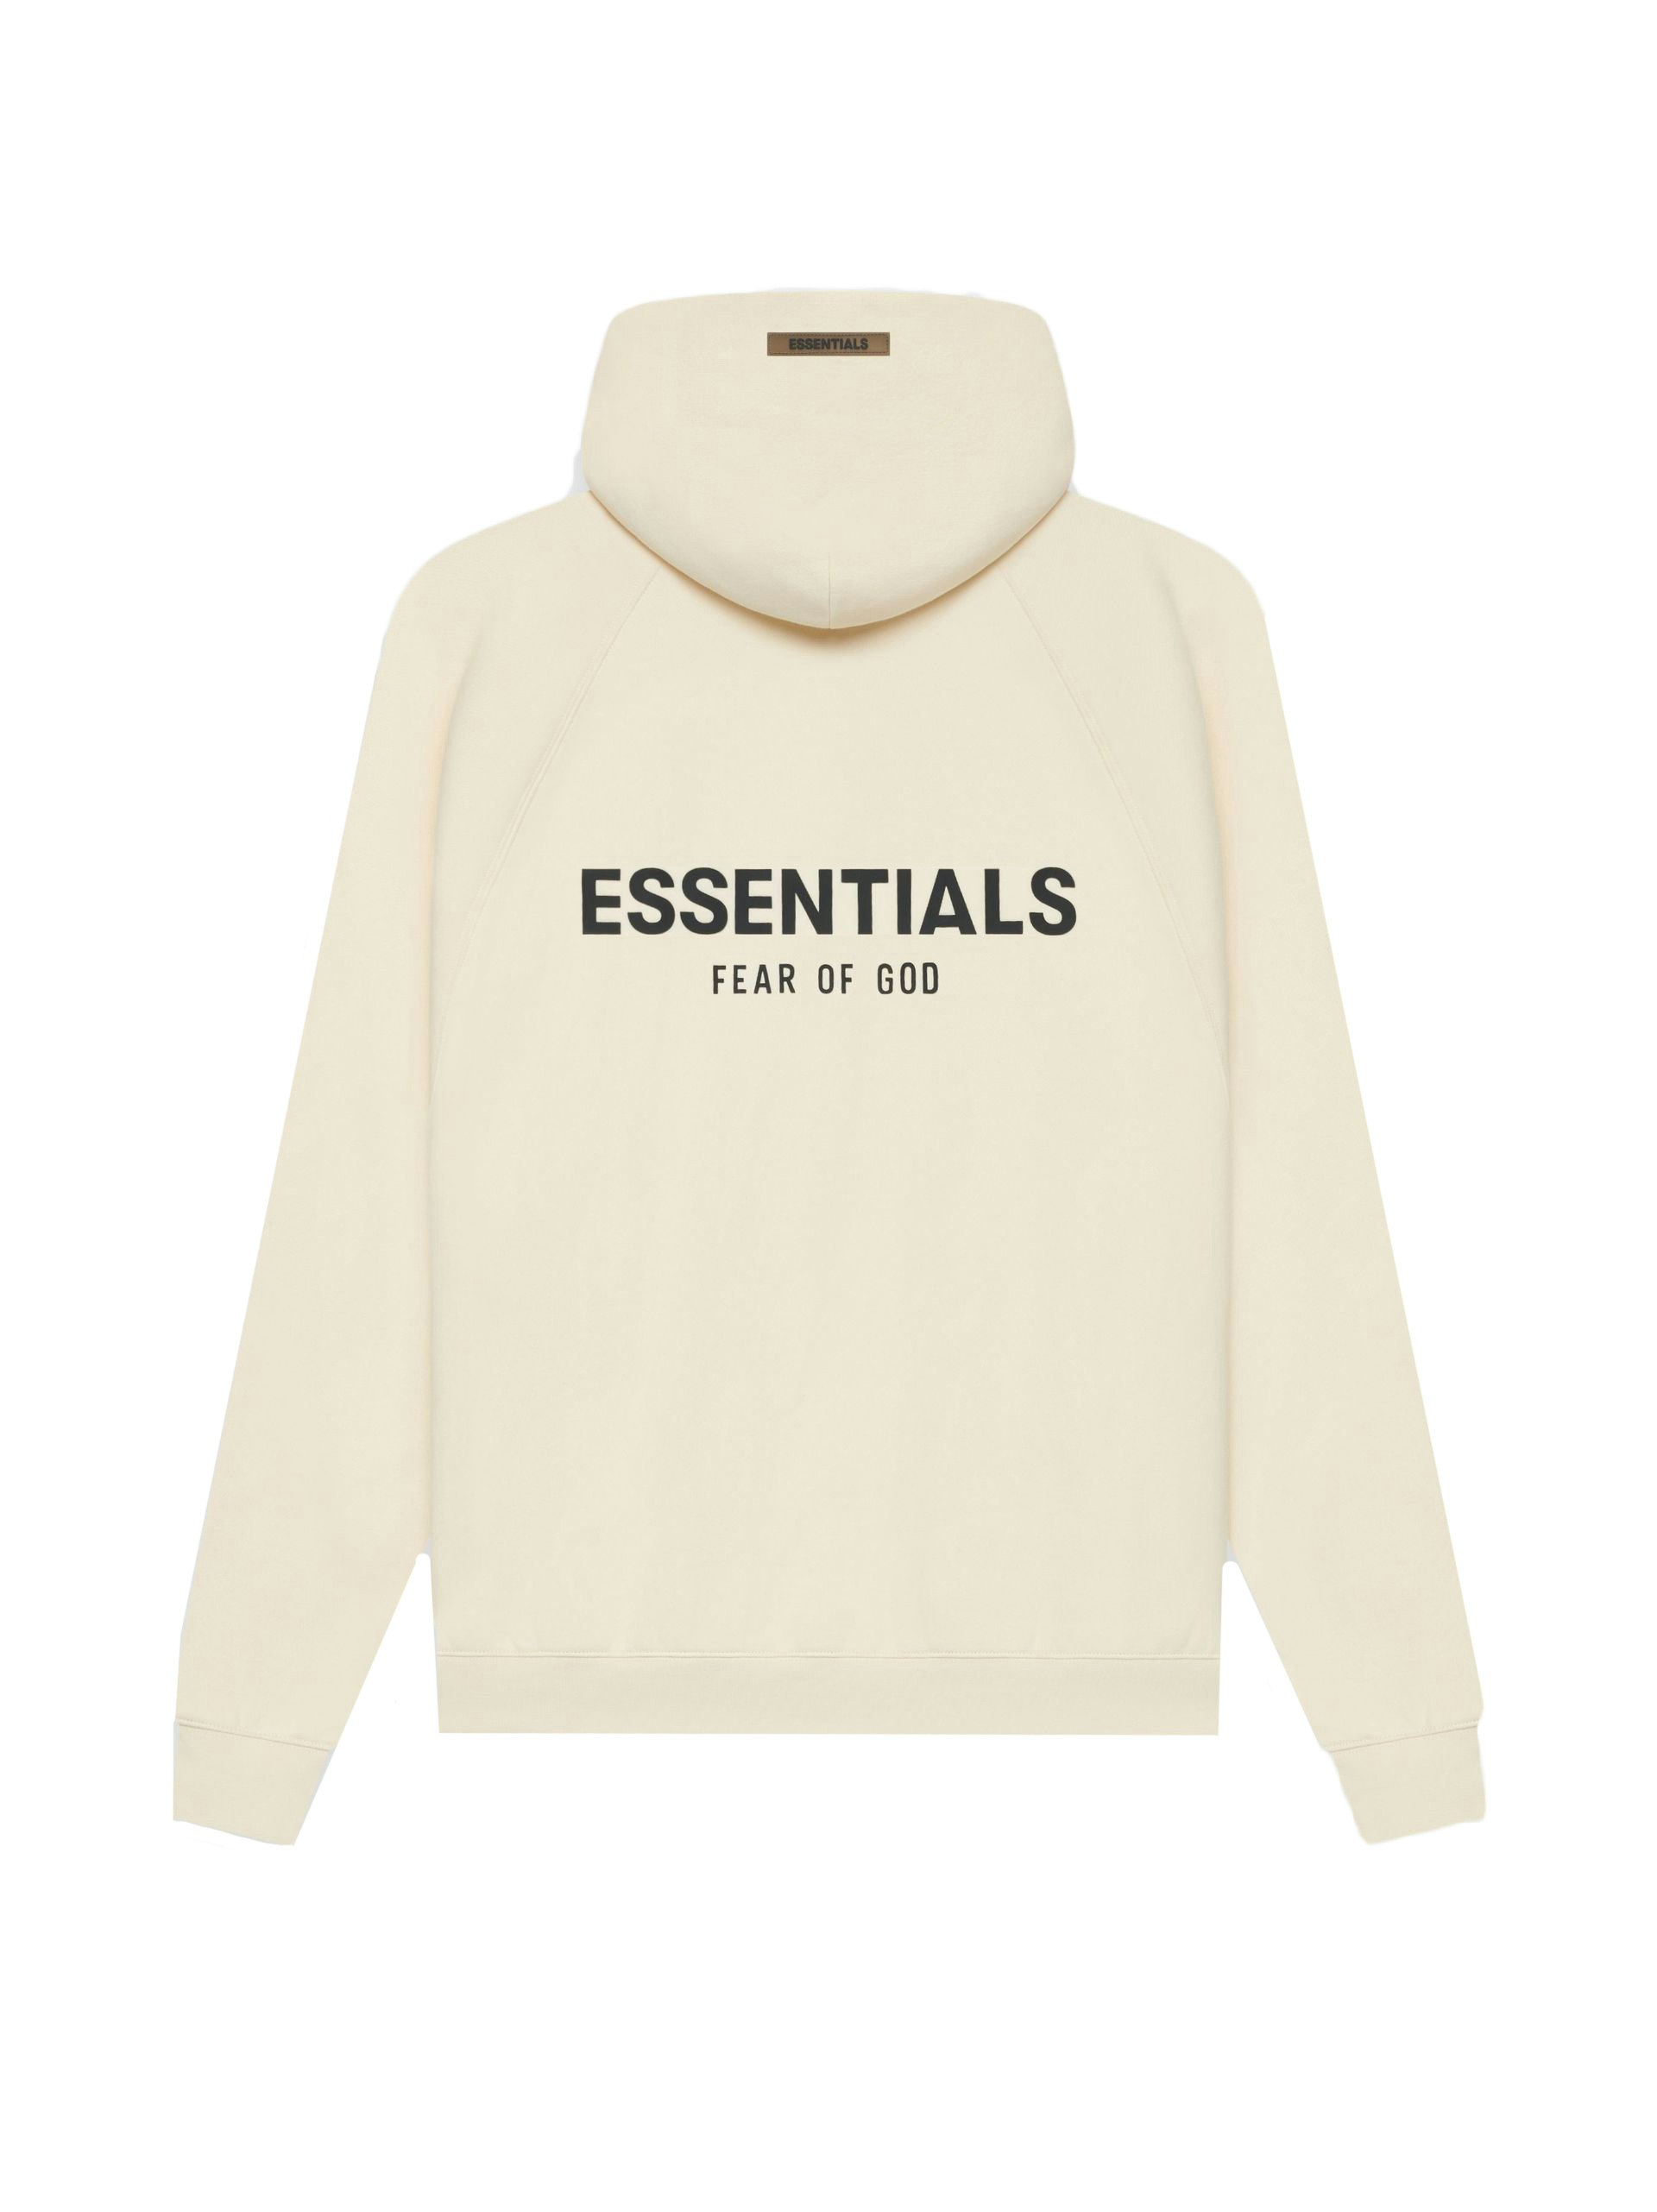 Fear of God Essentials Pull-Over Hoodie (SS21) Cream/Buttercream - SS21 - US